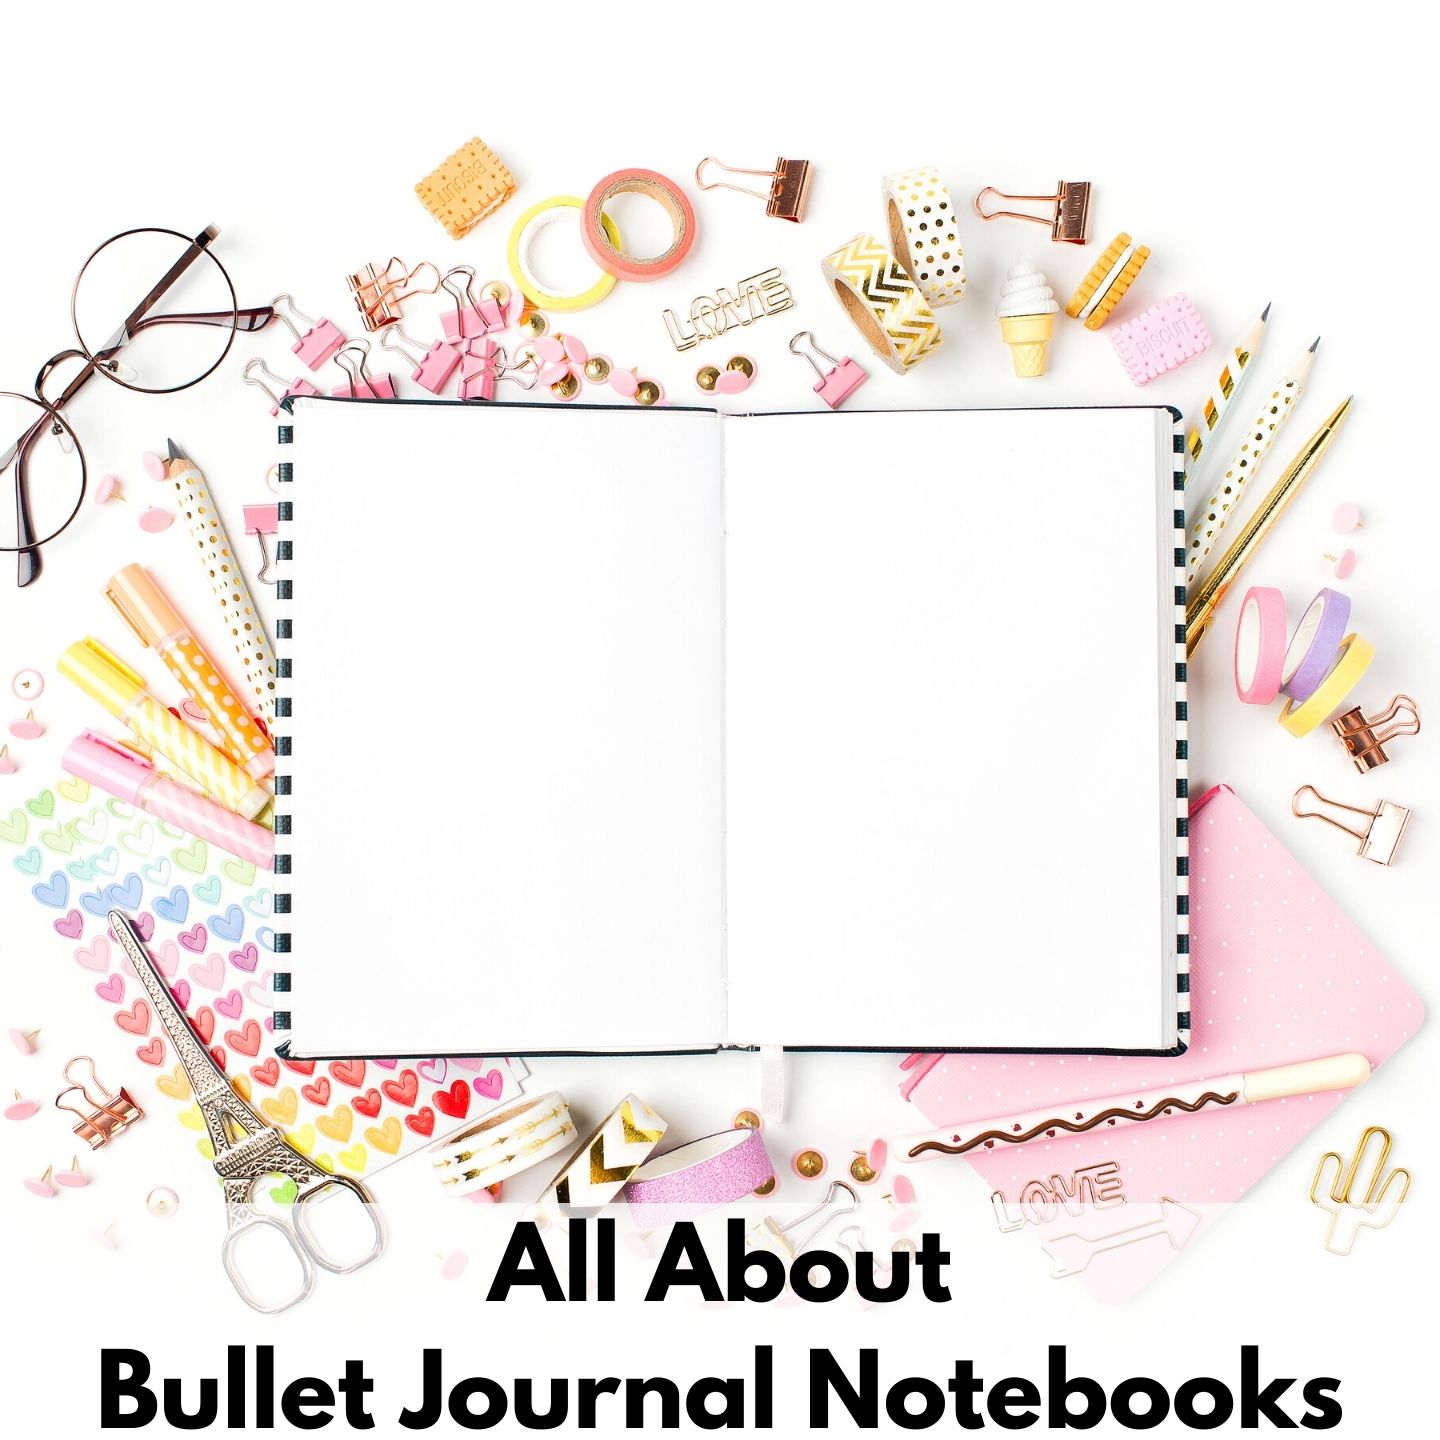 The Best Bullet Journal Notebook in 2020 - The Organized Mom